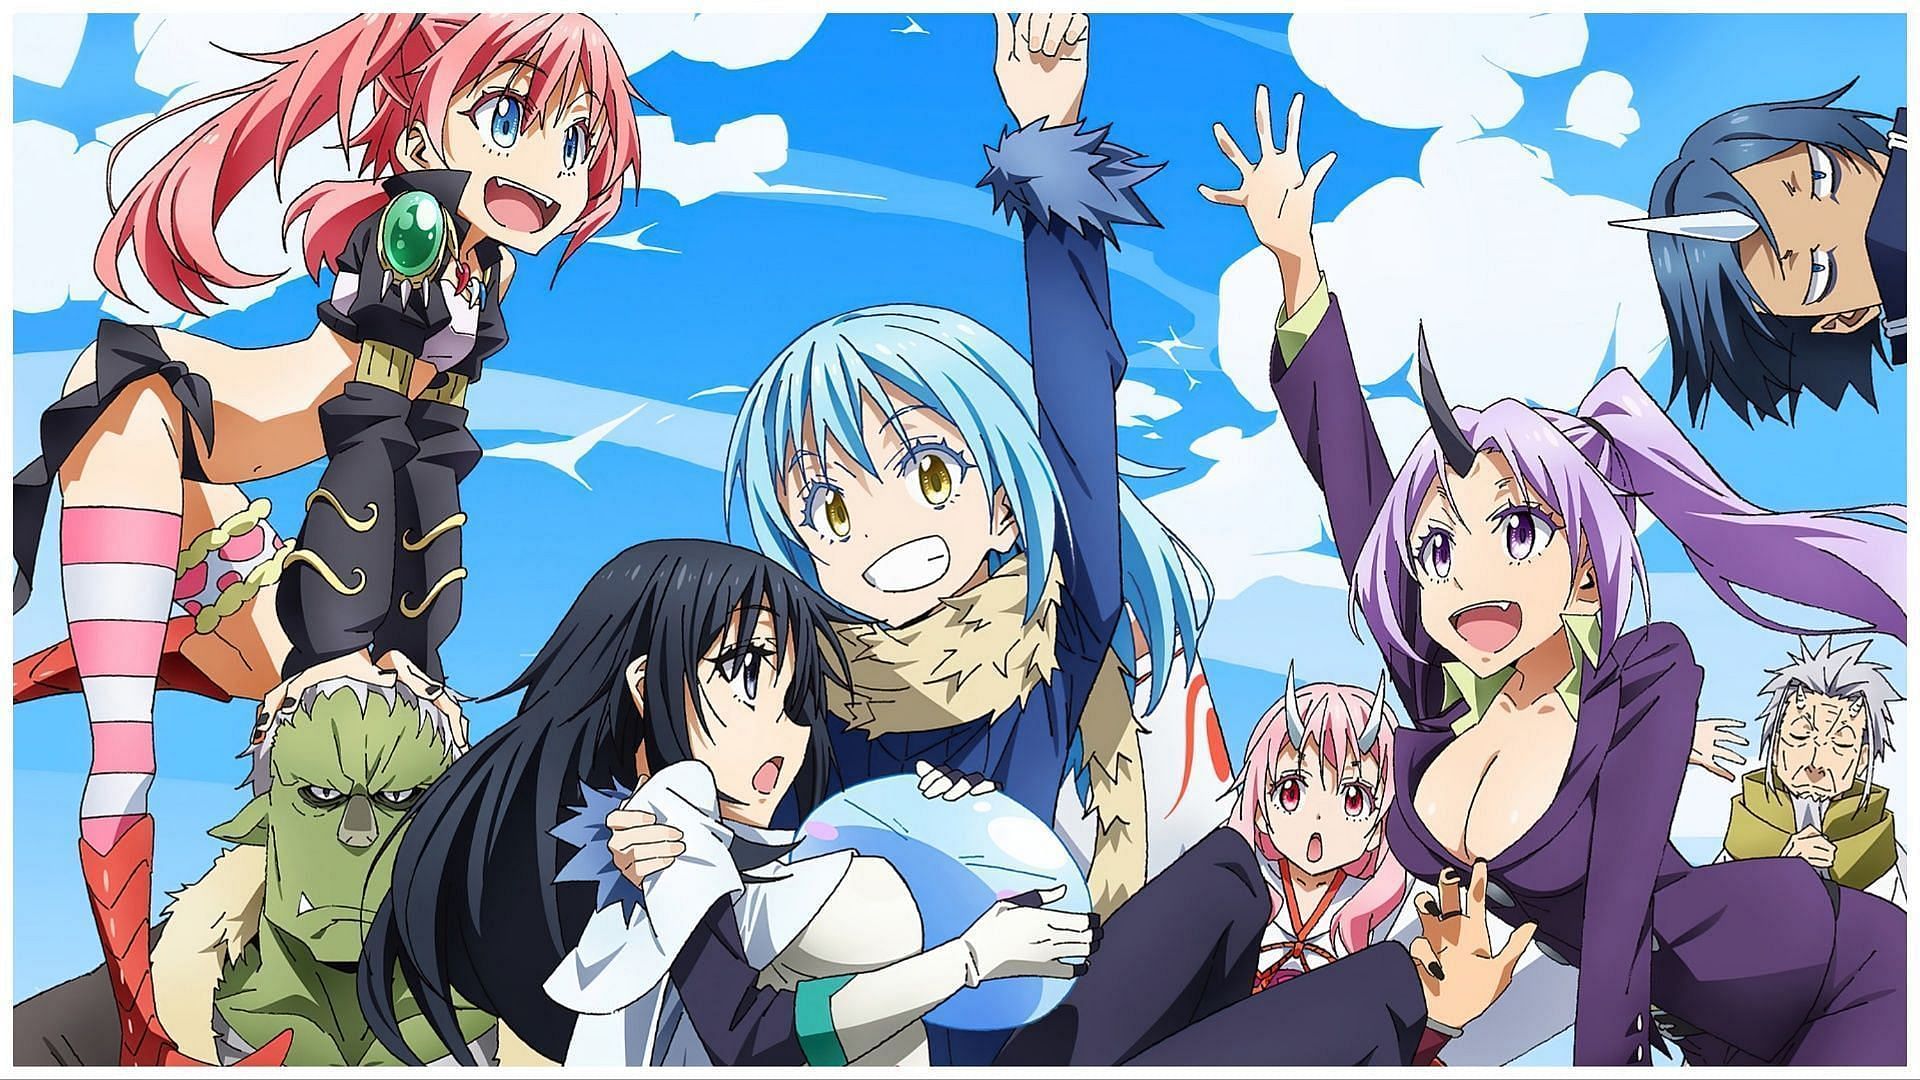 Characters from That Time I Got Reincarnated as a Slime (Image Via Eight Bit Studios)